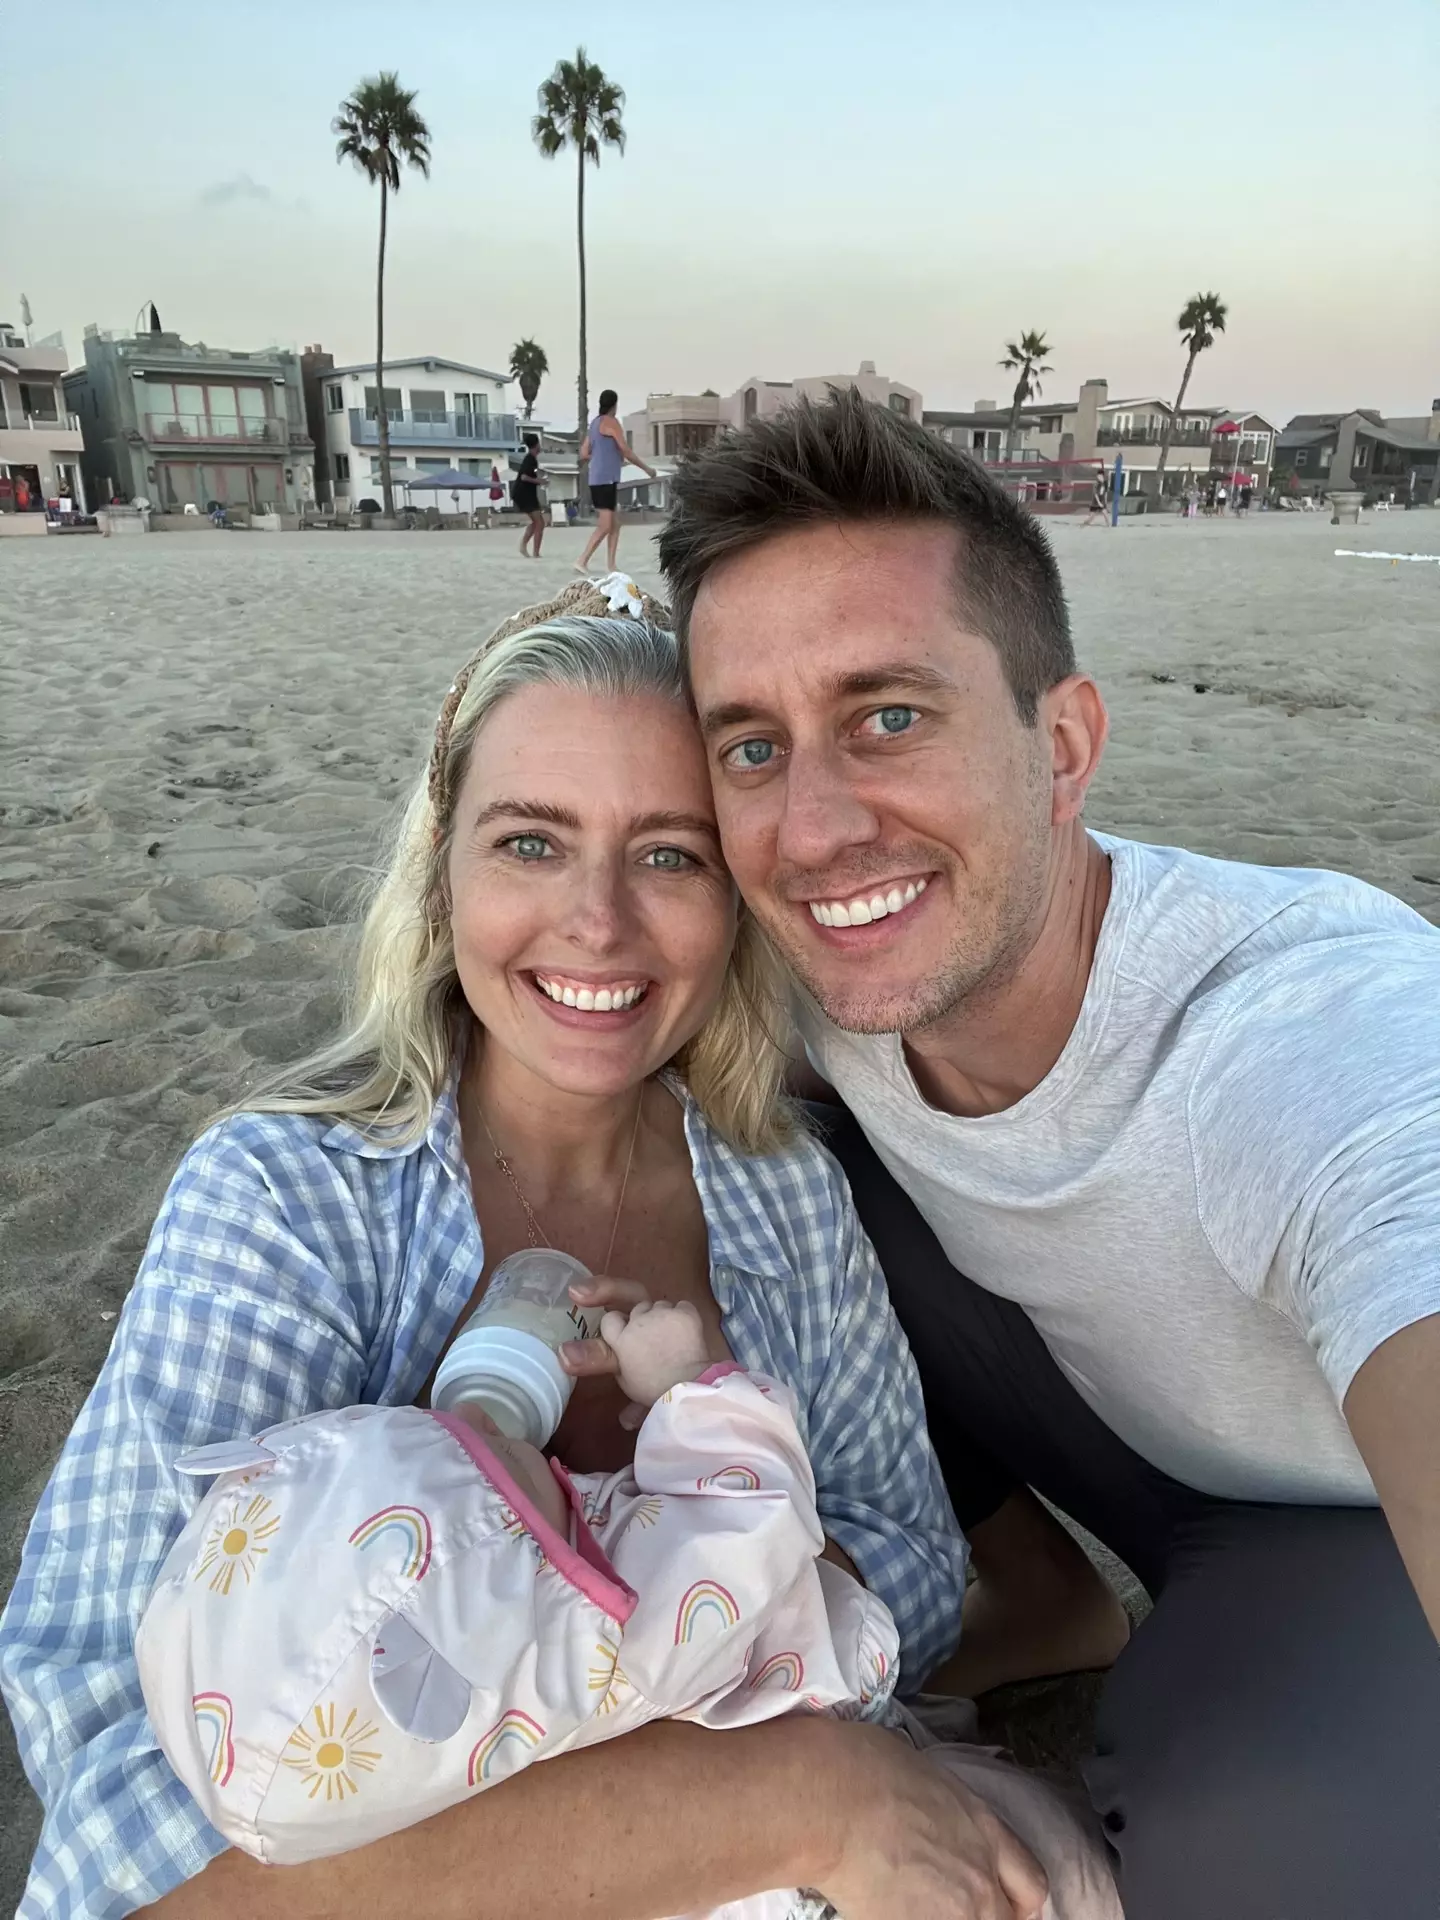 Ashley has an eight-month-old baby with her husband Mike.